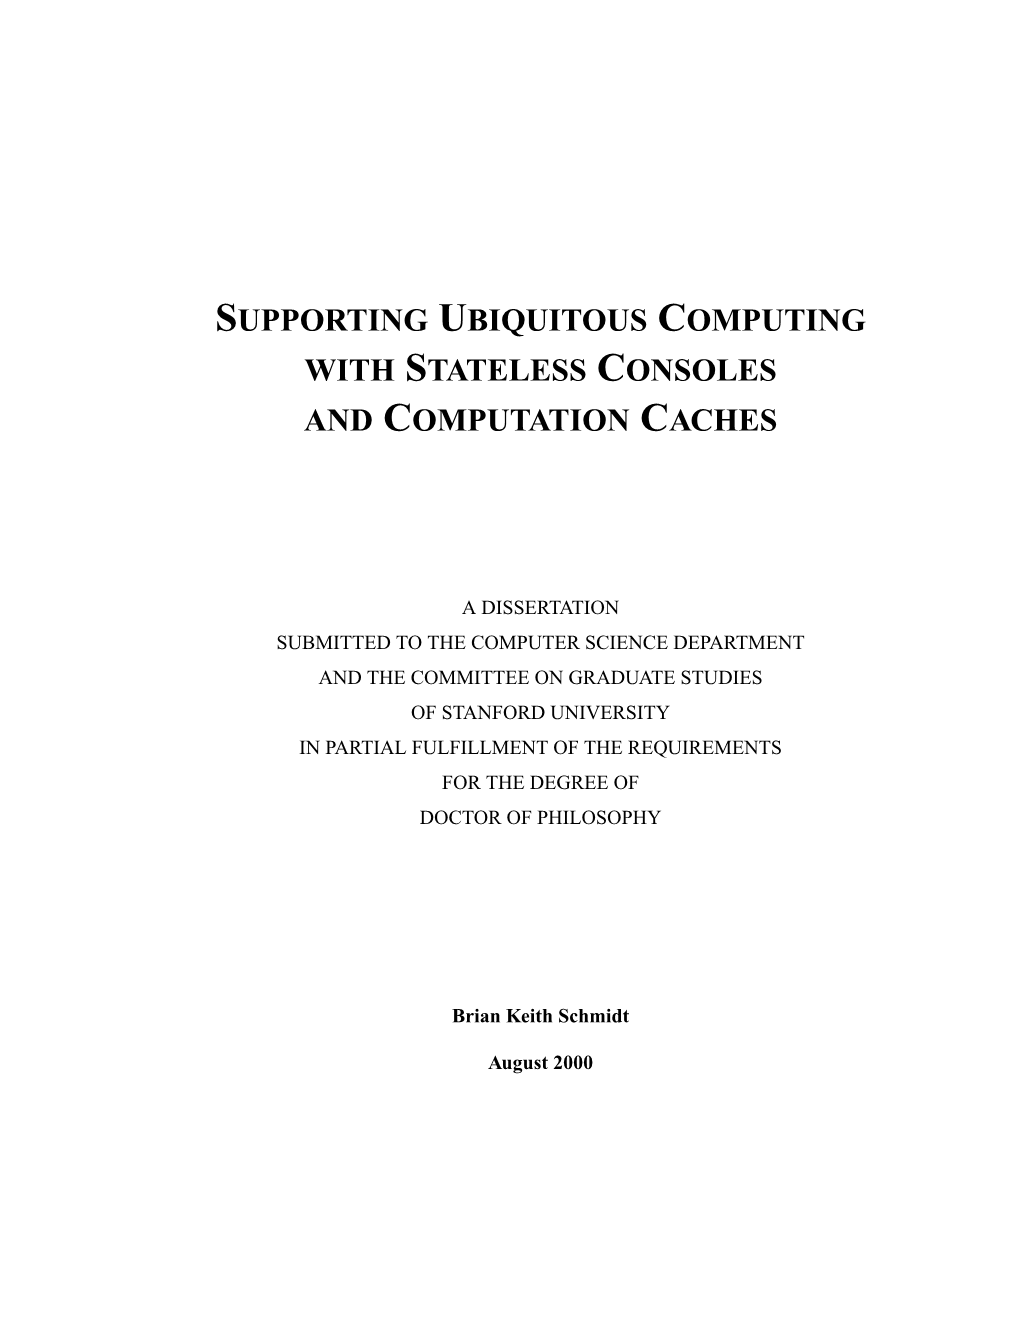 Supporting Ubiquitous Computing with Stateless Consoles and Computation Caches